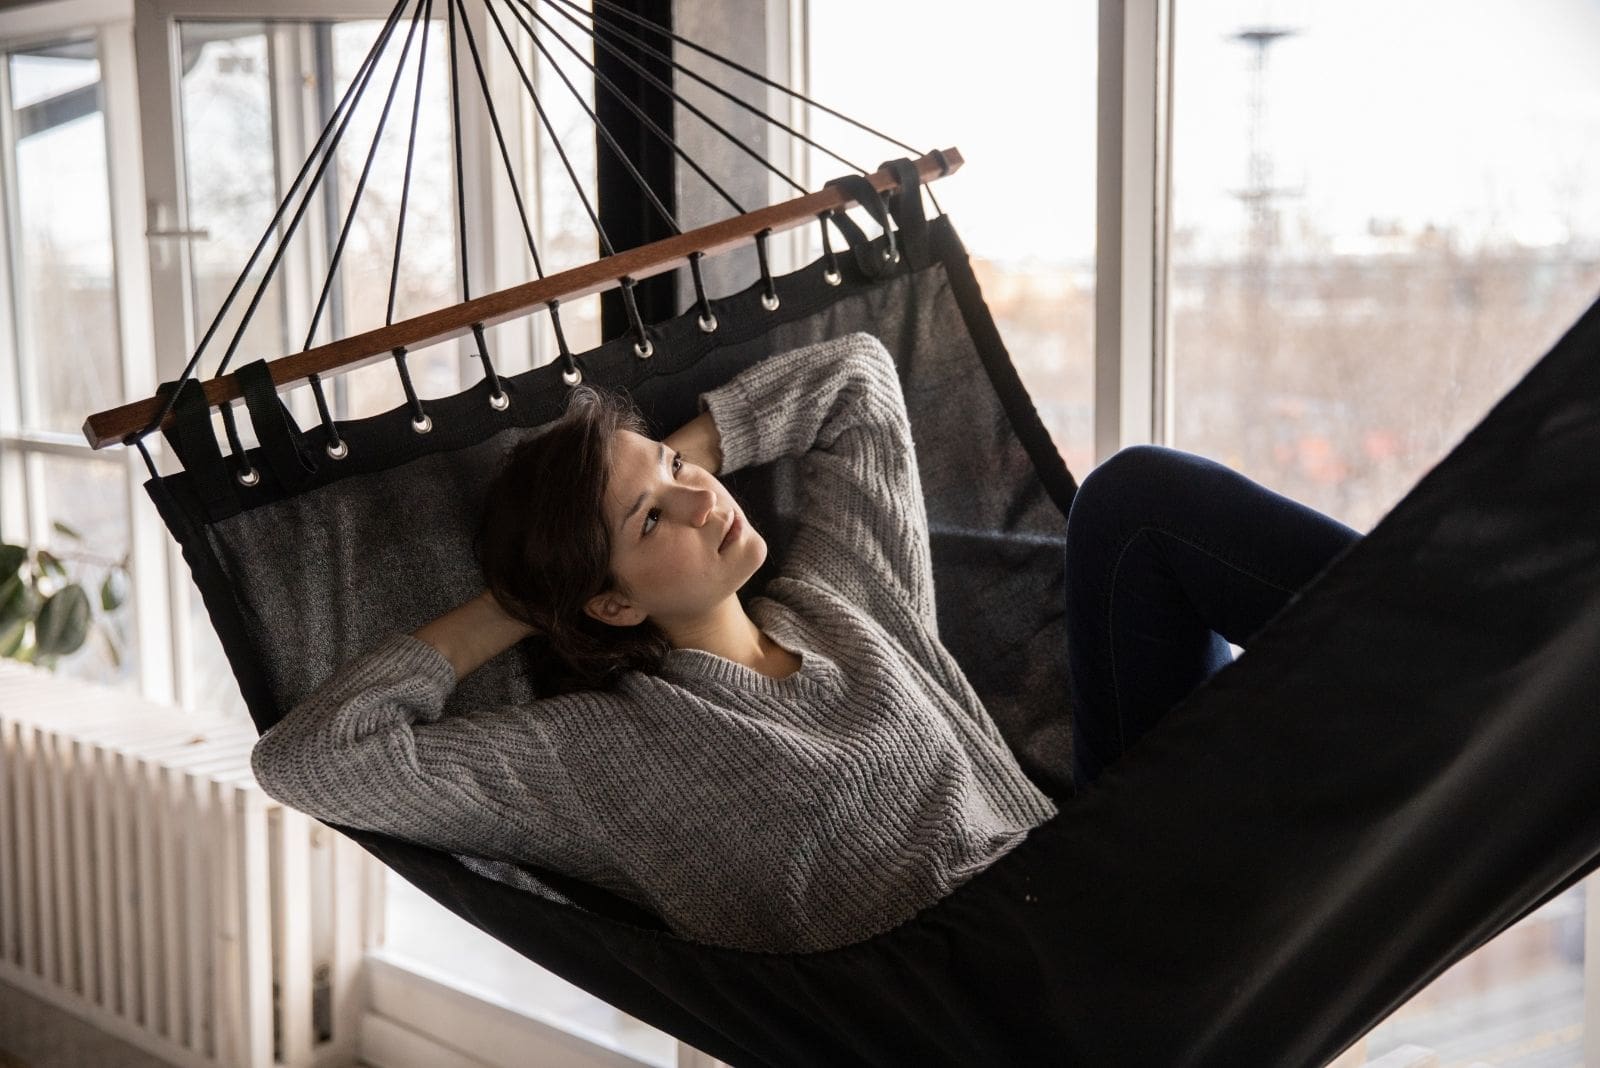 woman relaxing in a hammock inside the house/room building while thinking deeply and relaxing